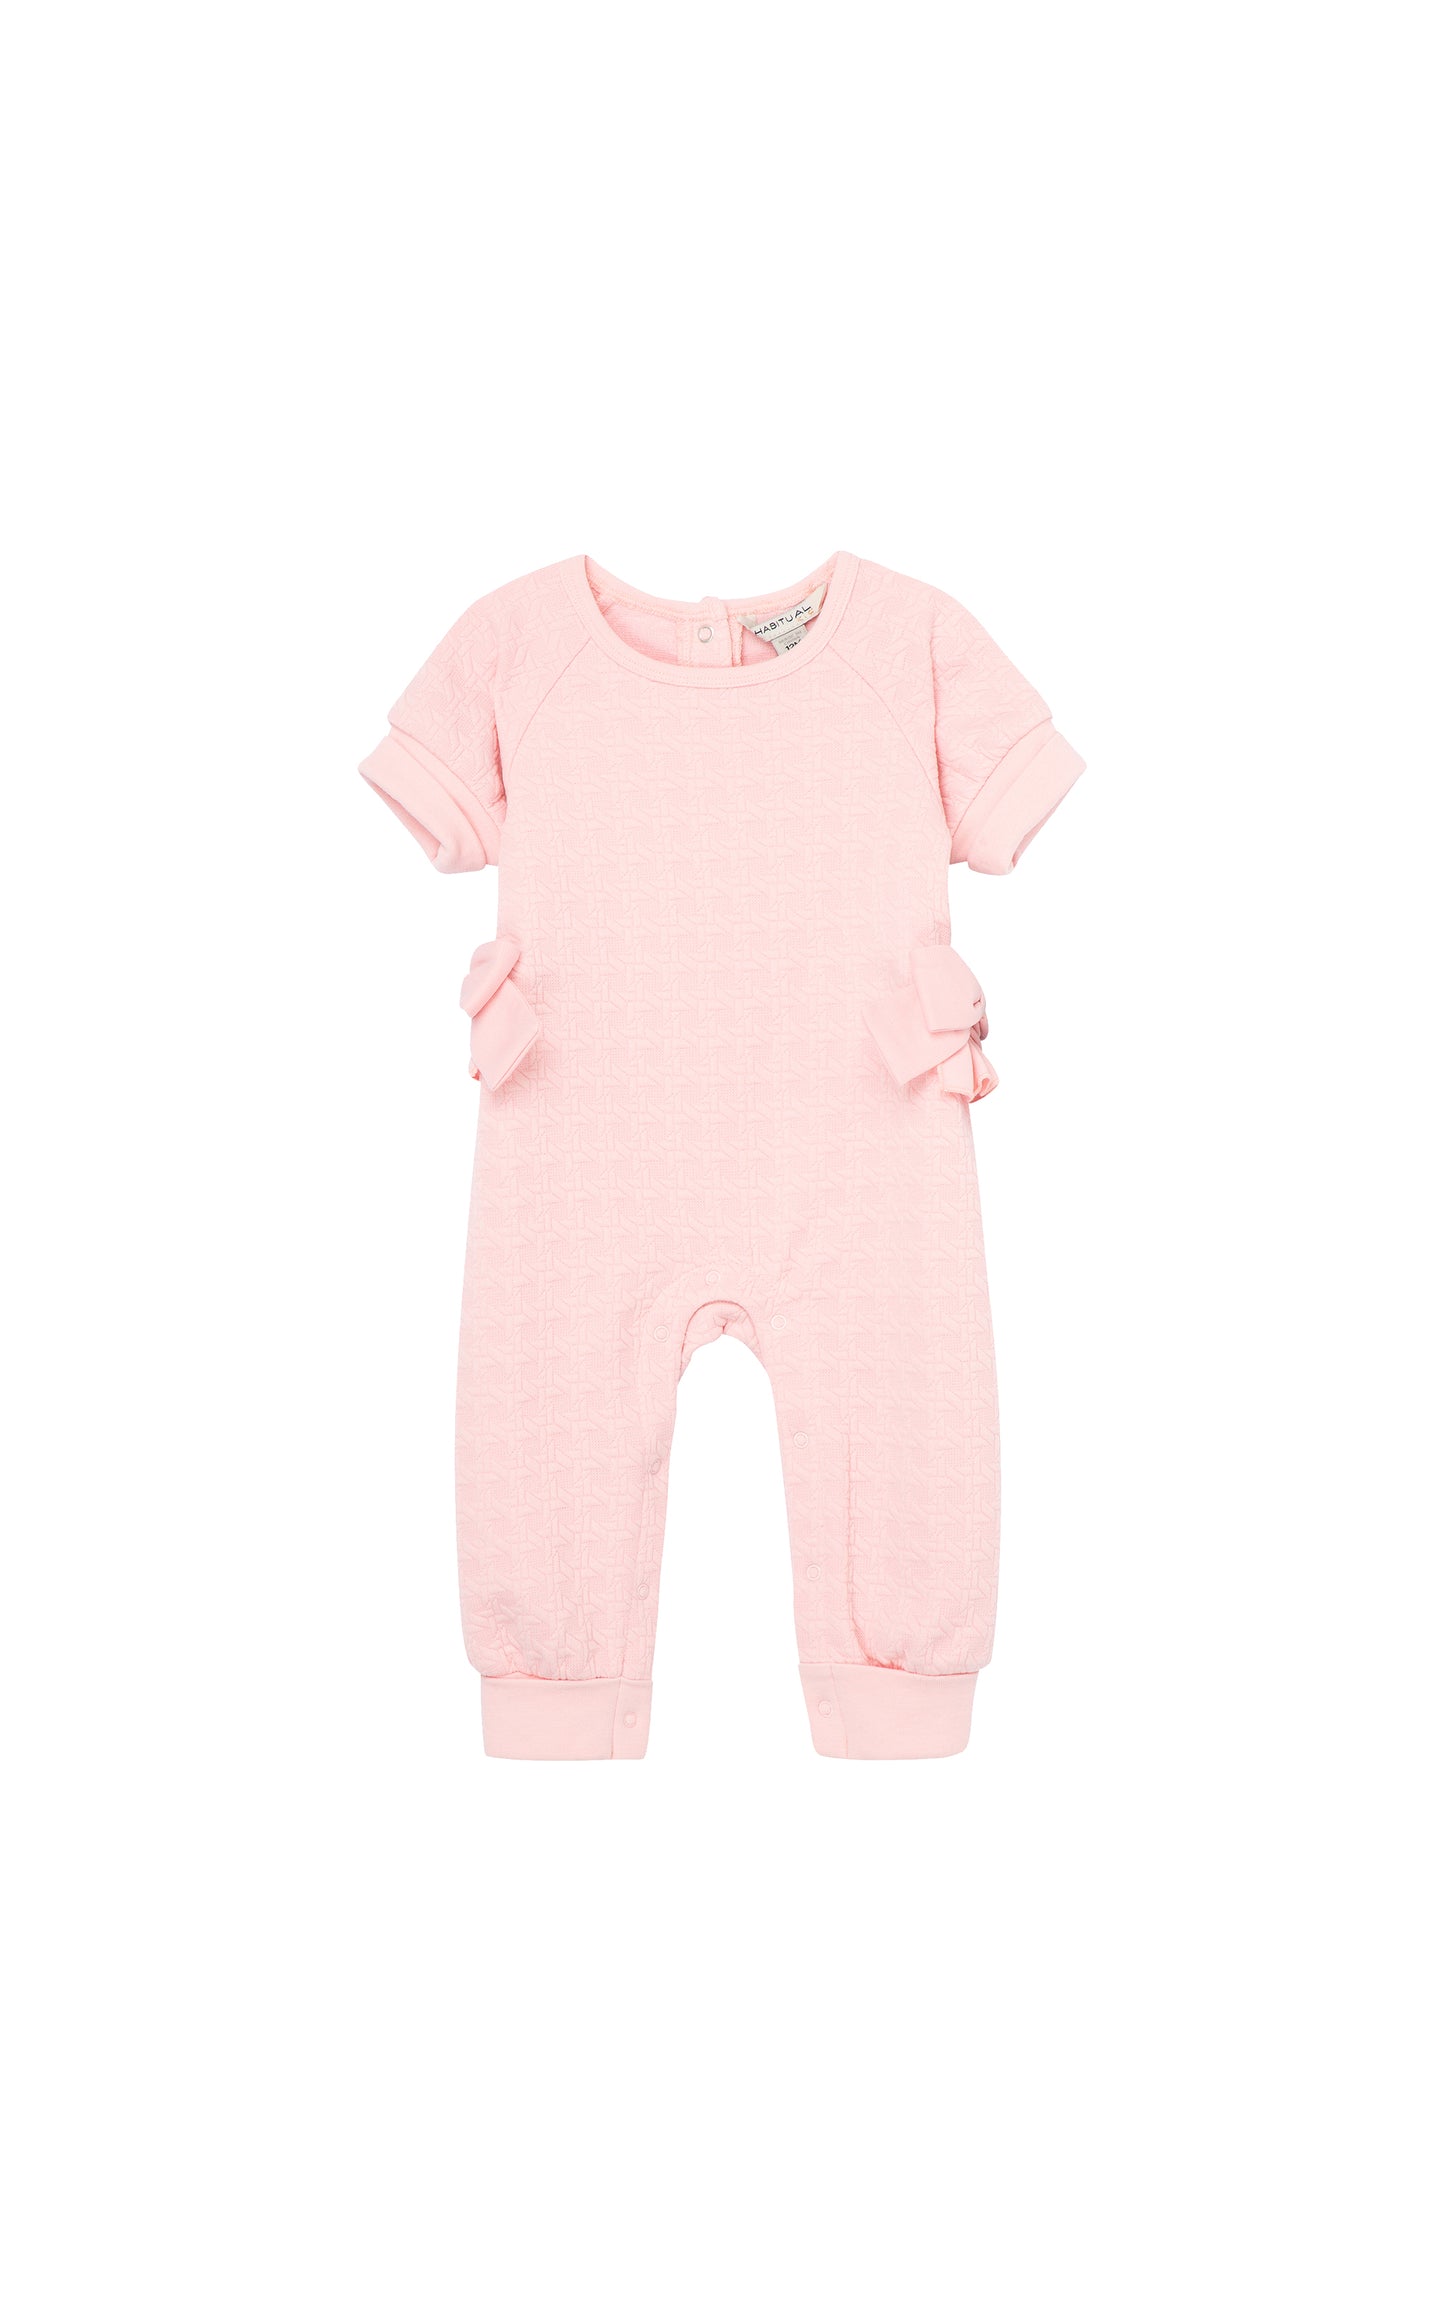 Pink double knit coverall with cuffed short sleeves, cuffed ankles, and medium-sized bows on rides